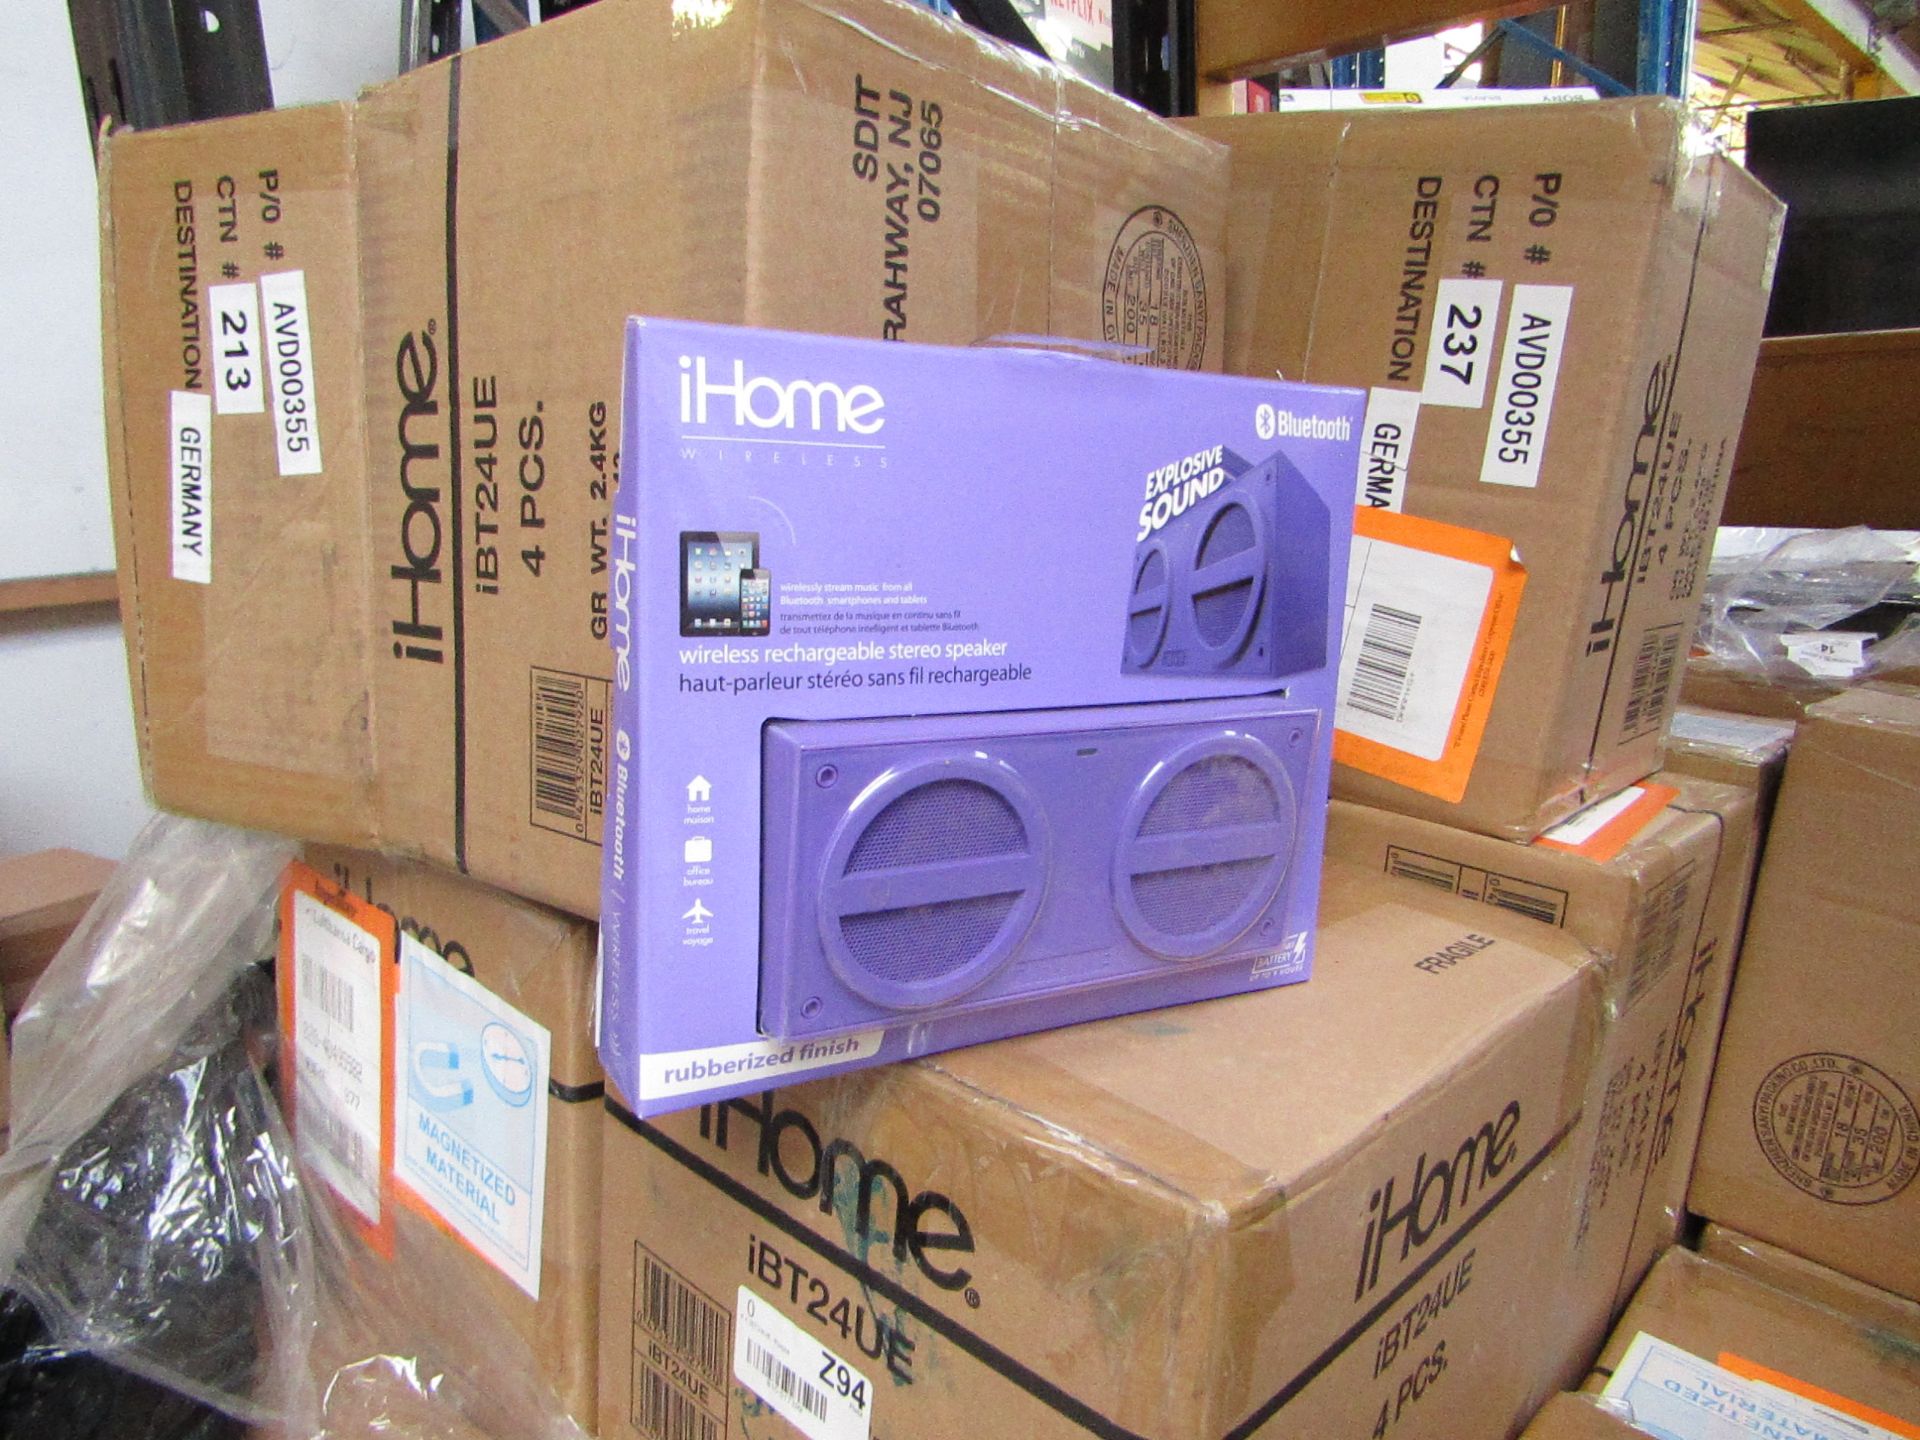 4x iHome Wireless rechargable Stereo speaker with rubberized finish, new and packaged